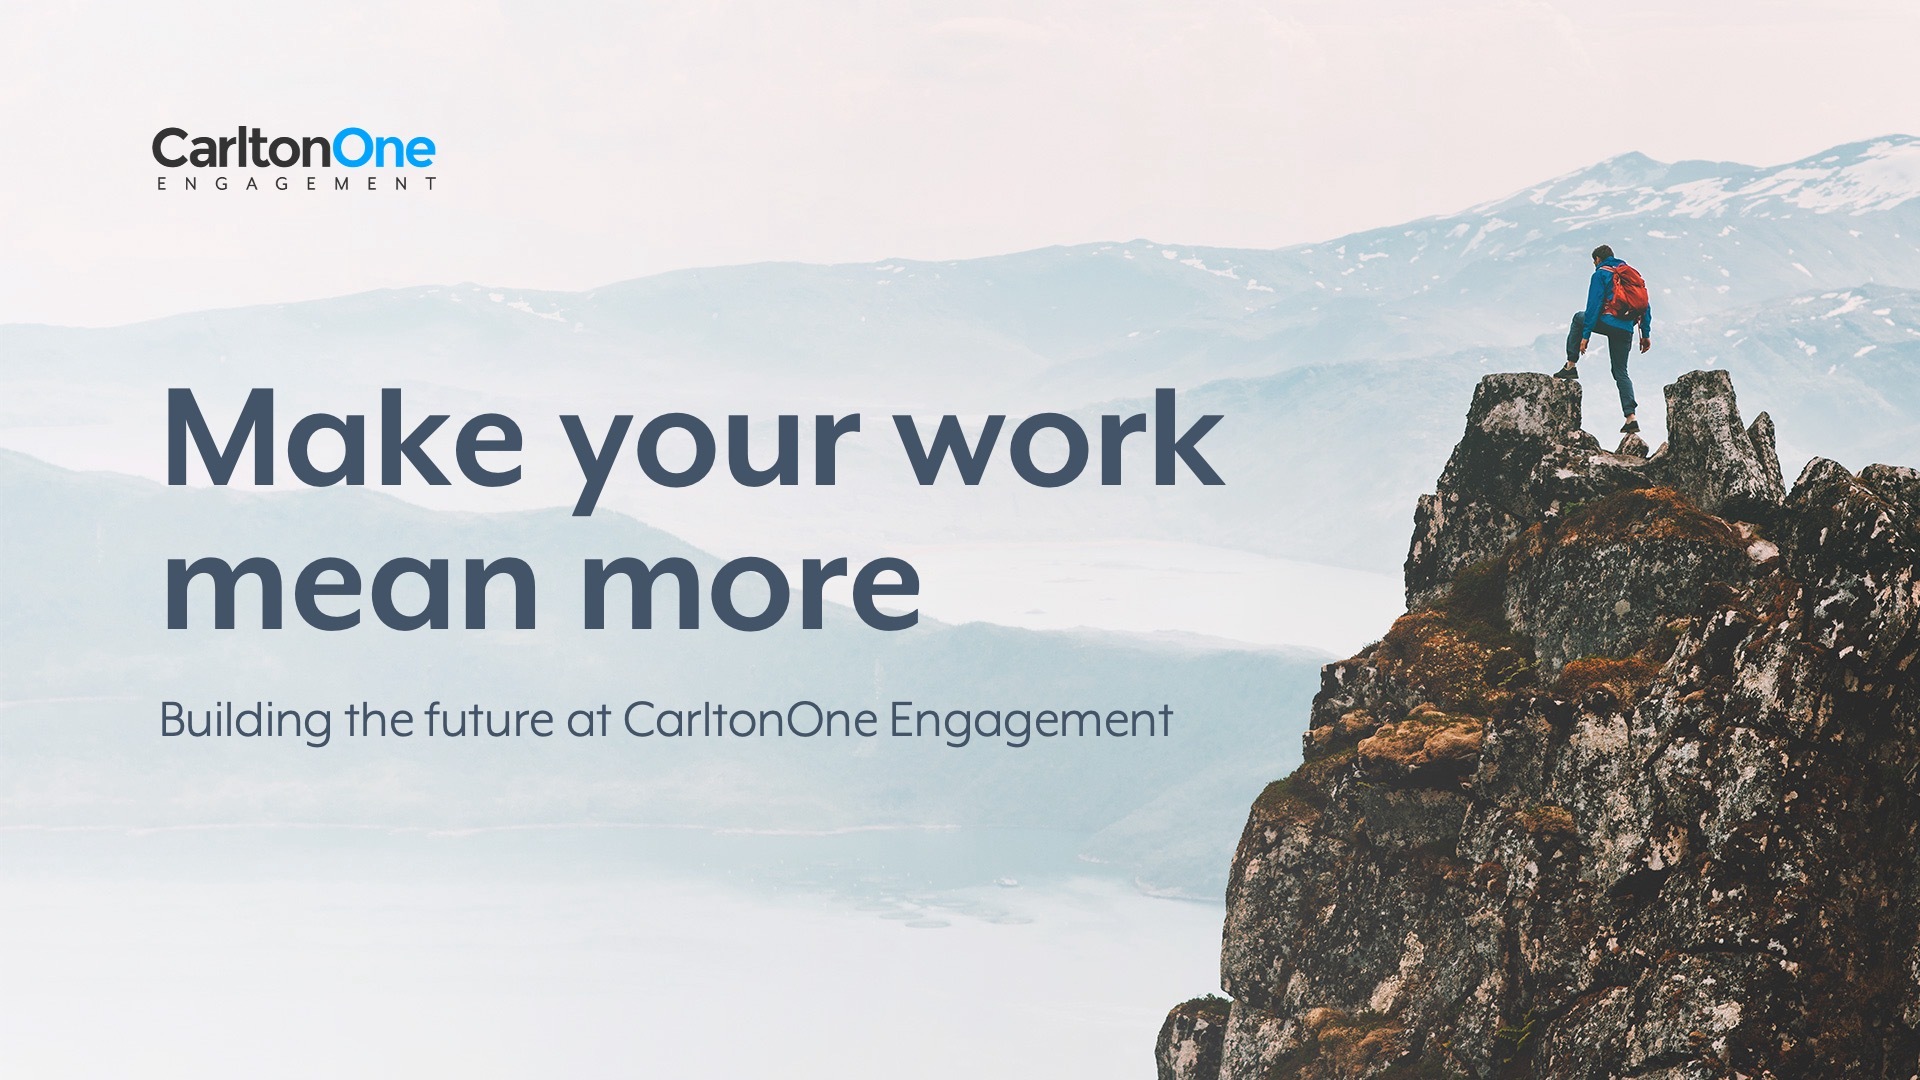 Make your work mean more: building the future of CarltonOne Engagement